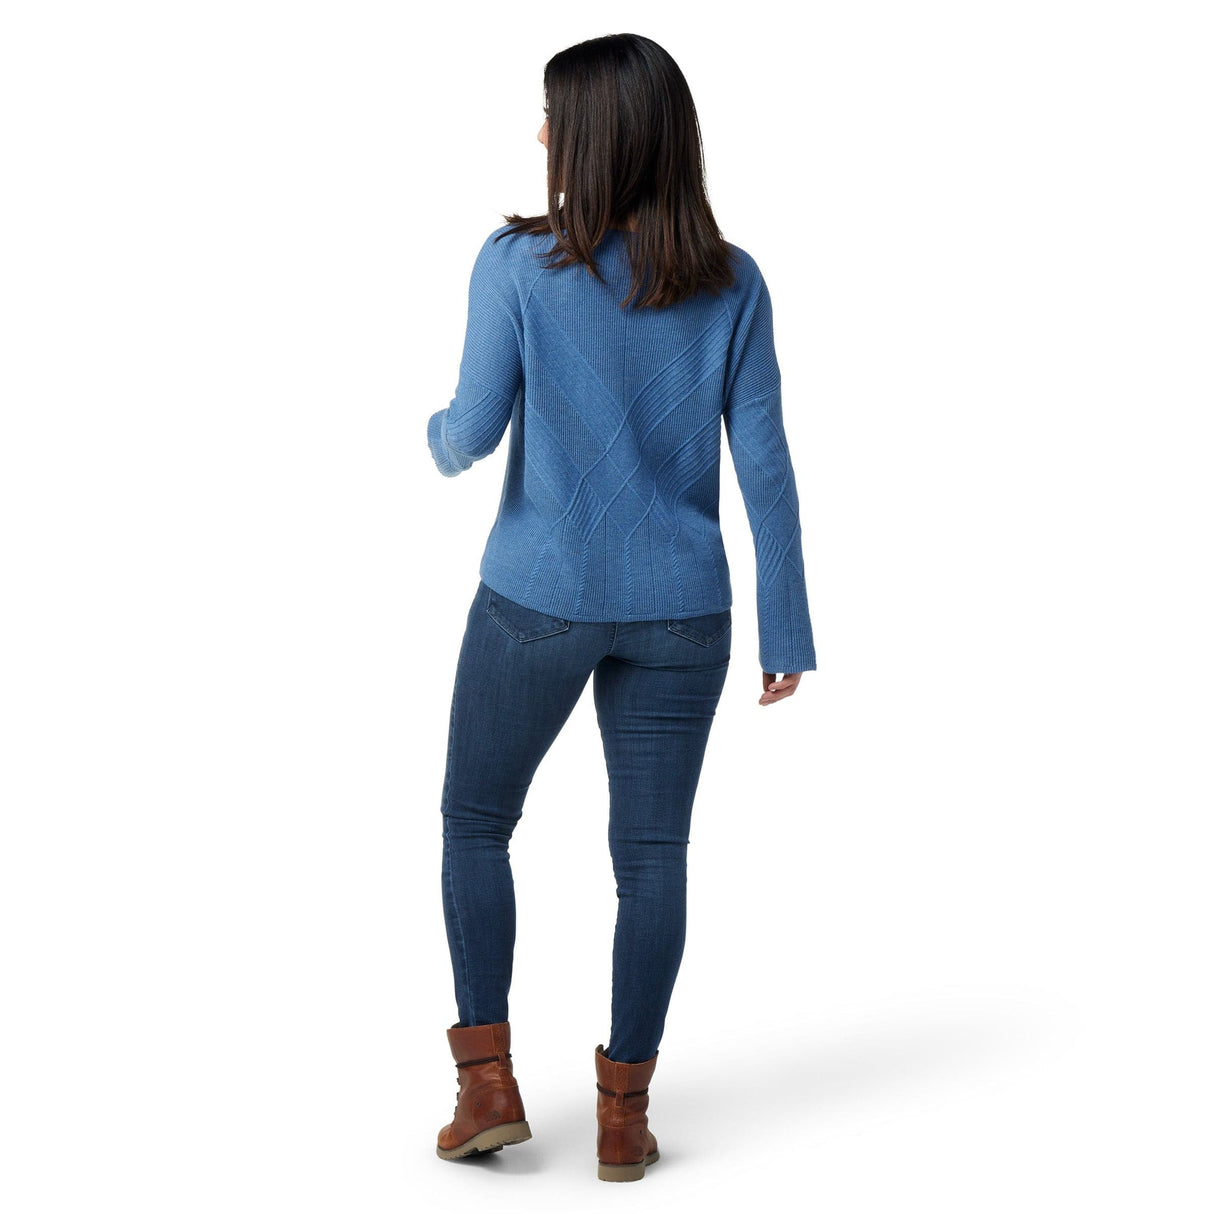 Smartwool Womens Shadow Pine Cable V-Neck Sweater  - 